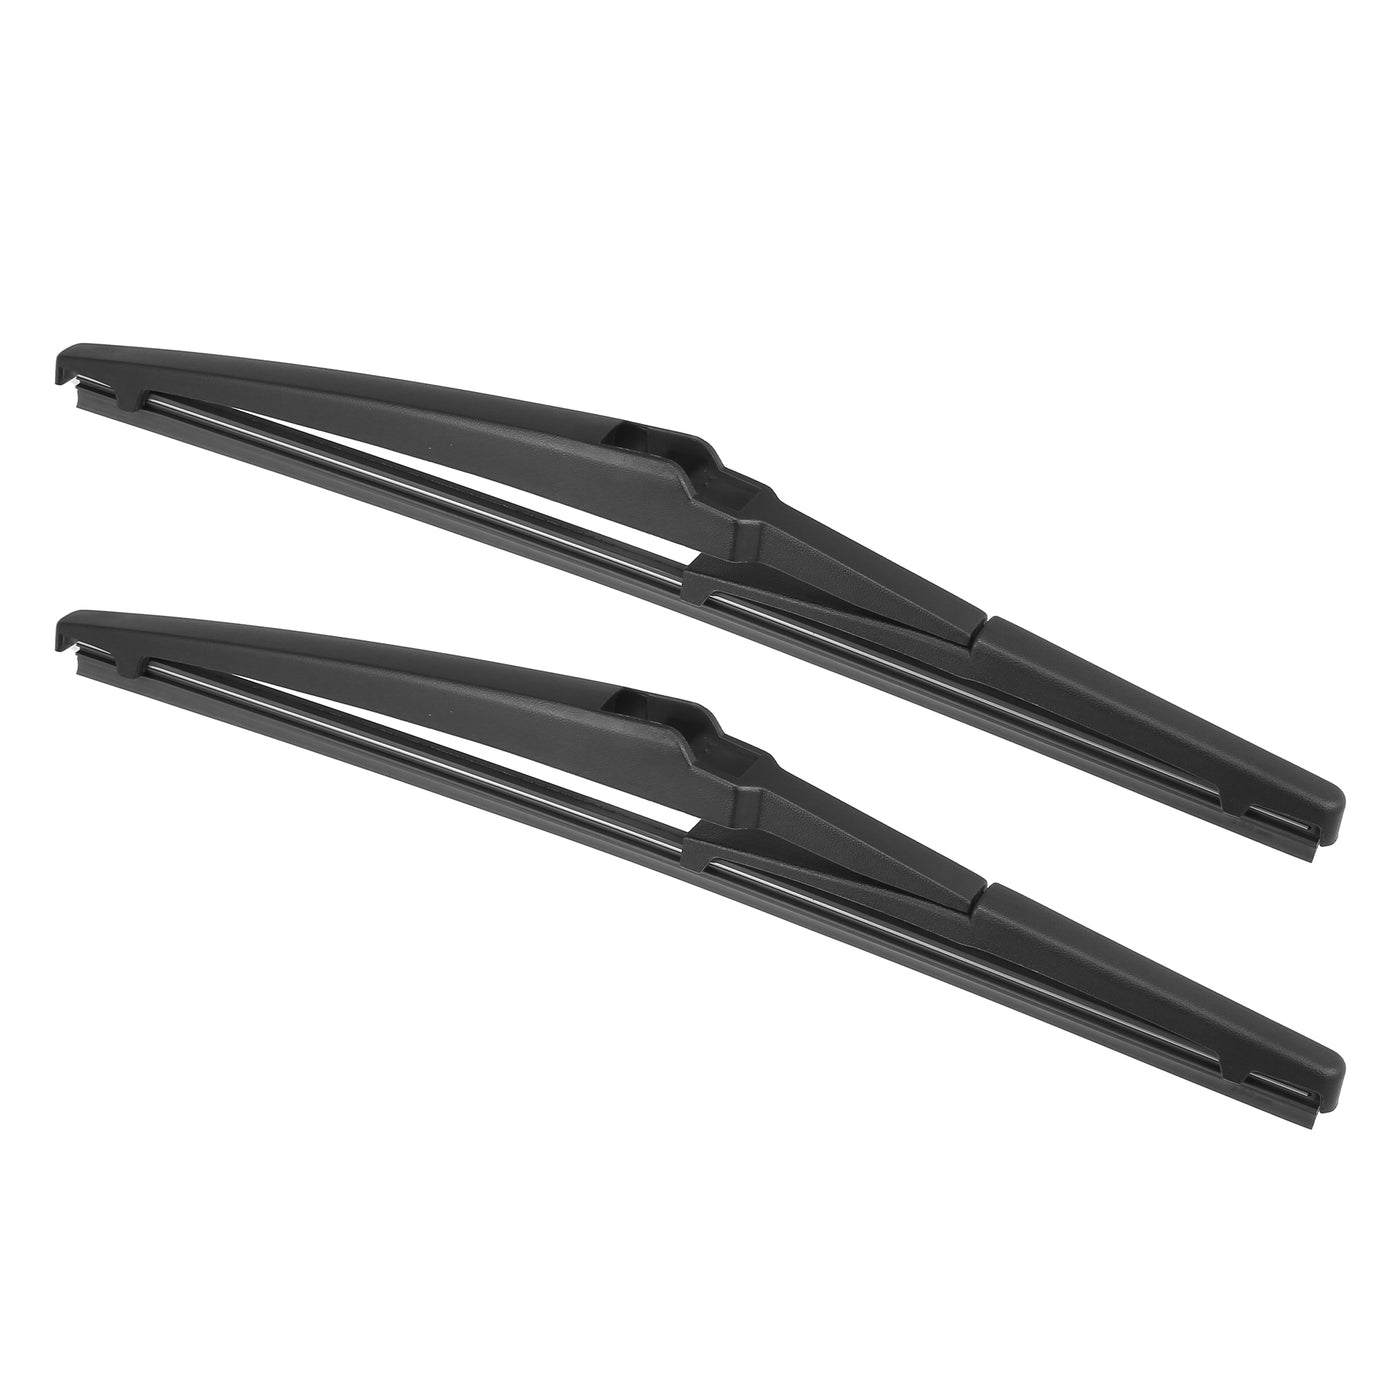 X AUTOHAUX 2pcs Rear Windshield Wiper Blade Replacement for Toyota Rav4 2000-2012 for Dodge Journey 2008-2016 for Jeep Grand Cherokee 2011-2016